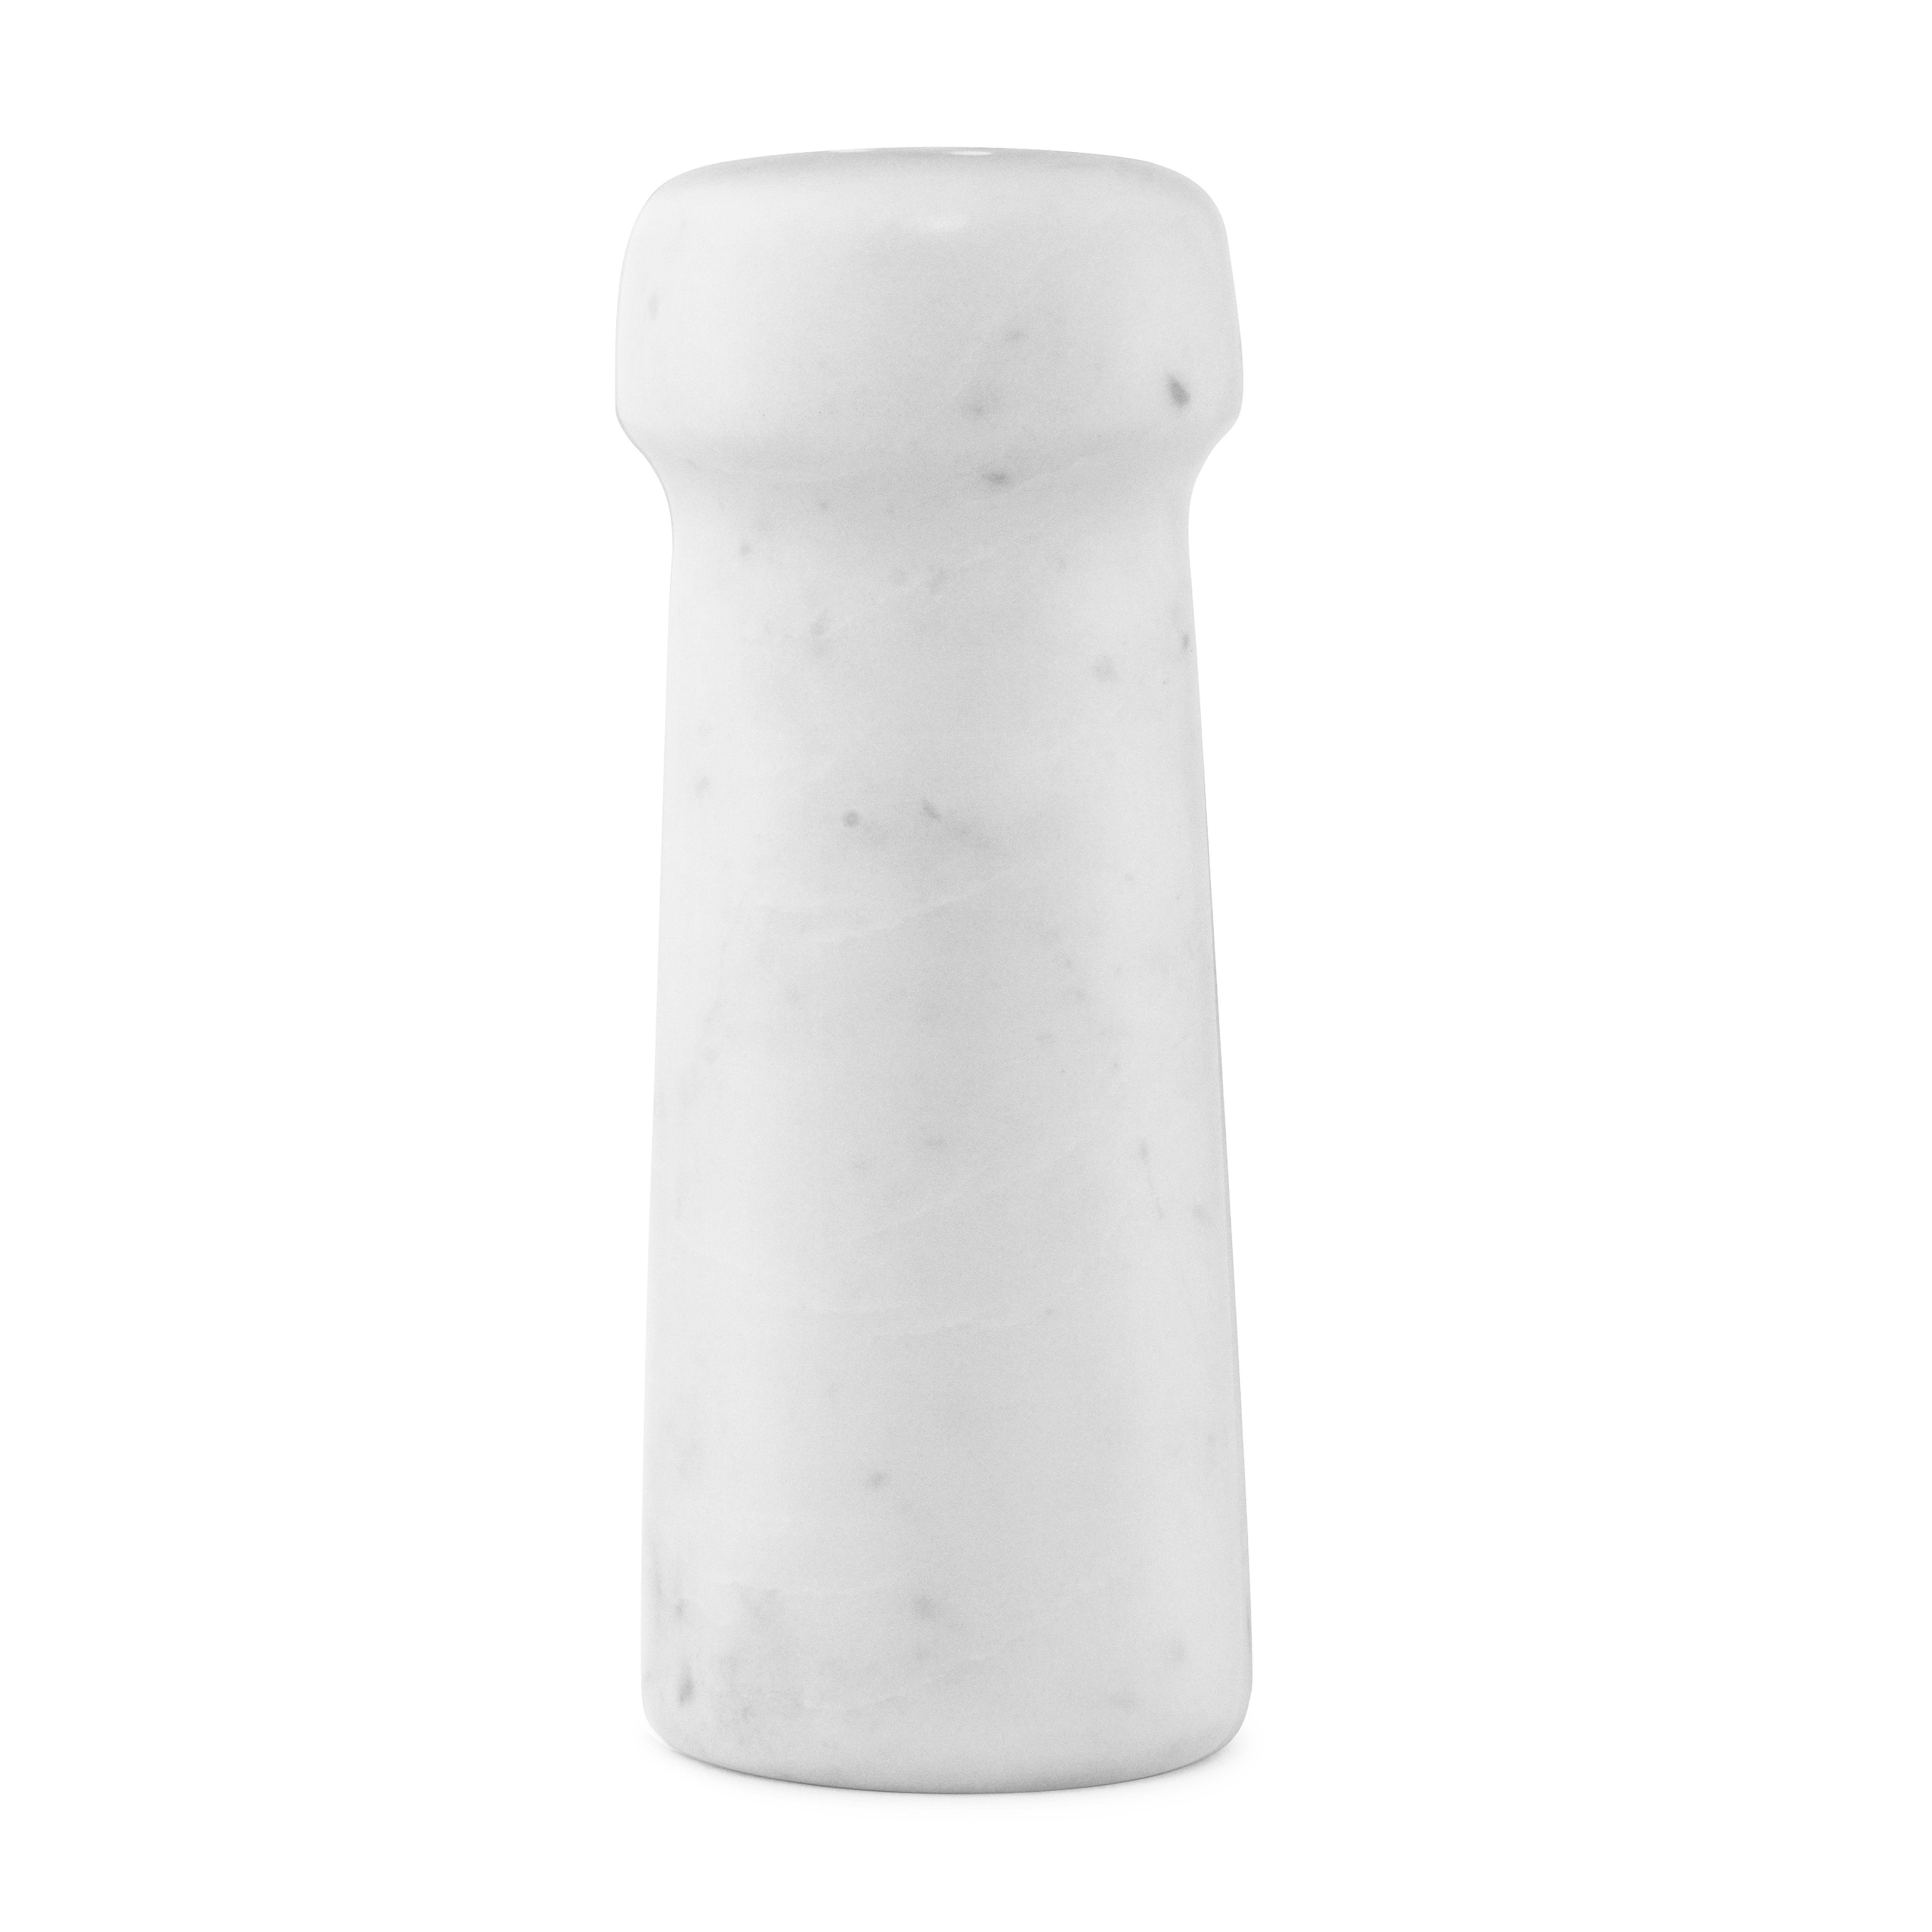 Buy the Craft Salt and Pepper Shakers by NCH